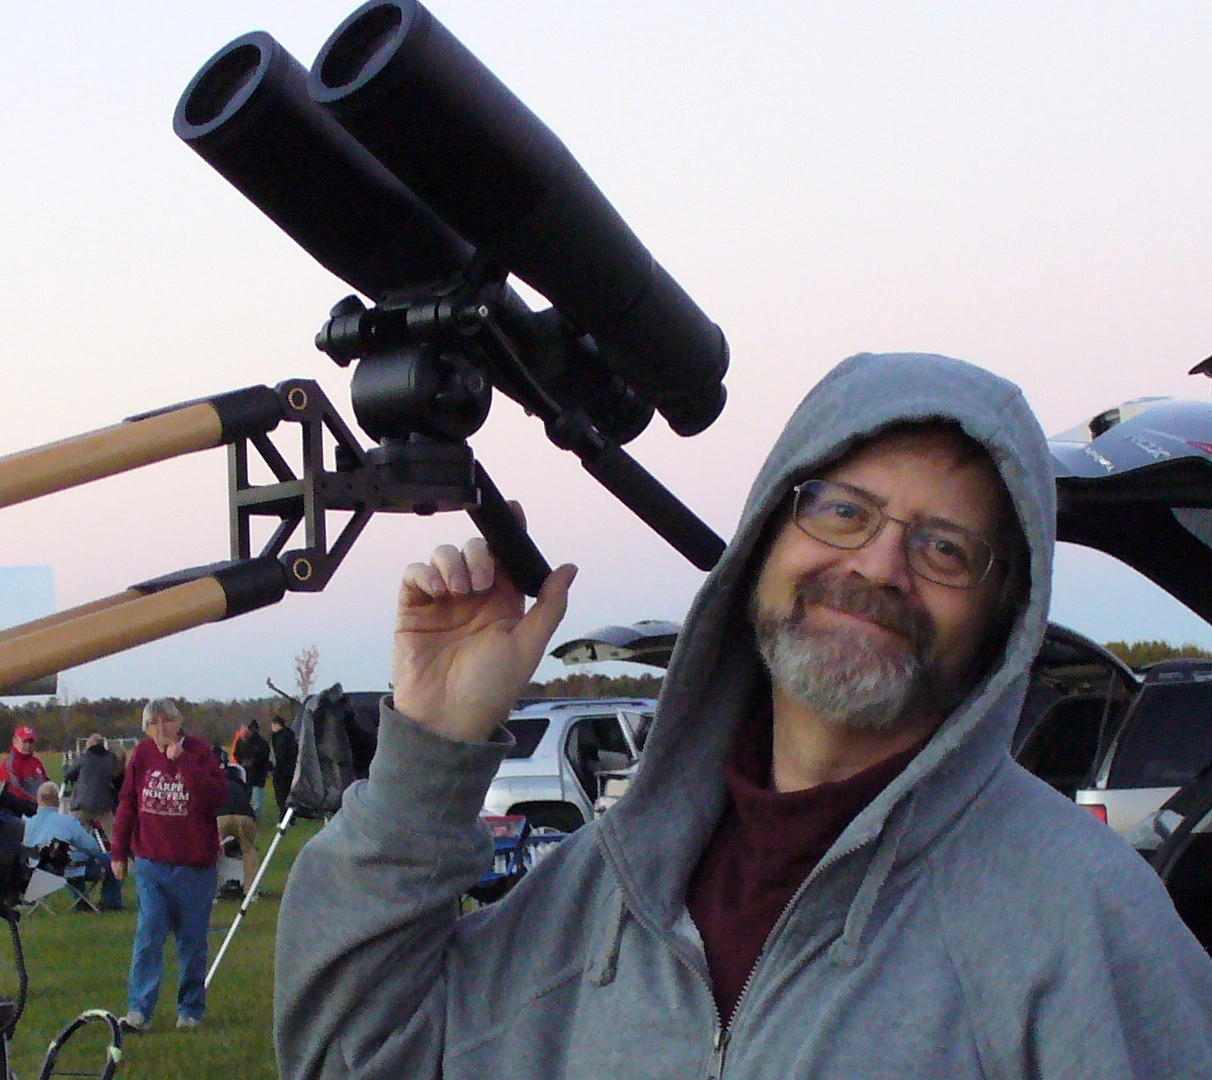 Me with Oberwerk 20x65ED on an OB PM1 parallelogram mount at an ASKC club star party.